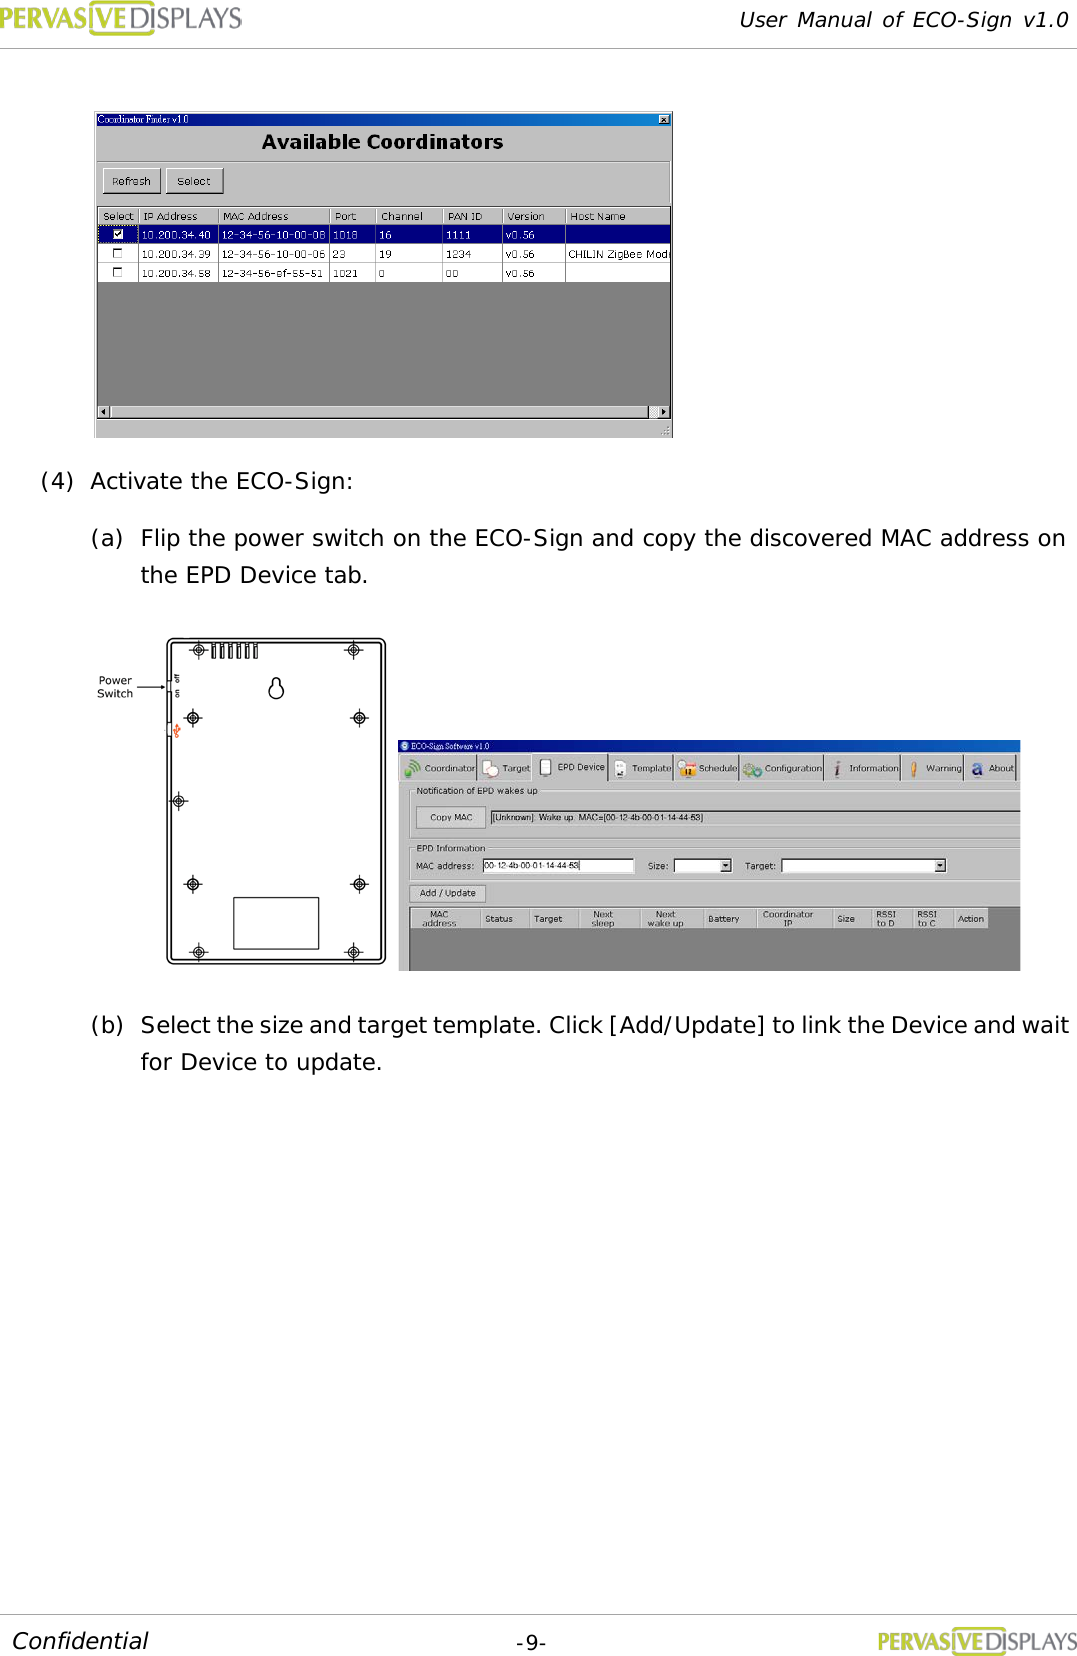 User Manual of ECO-Sign v1.0  -9- Confidential   (4) Activate the ECO-Sign: (a) Flip the power switch on the ECO-Sign and copy the discovered MAC address on the EPD Device tab.  (b) Select the size and target template. Click [Add/Update] to link the Device and wait for Device to update. 